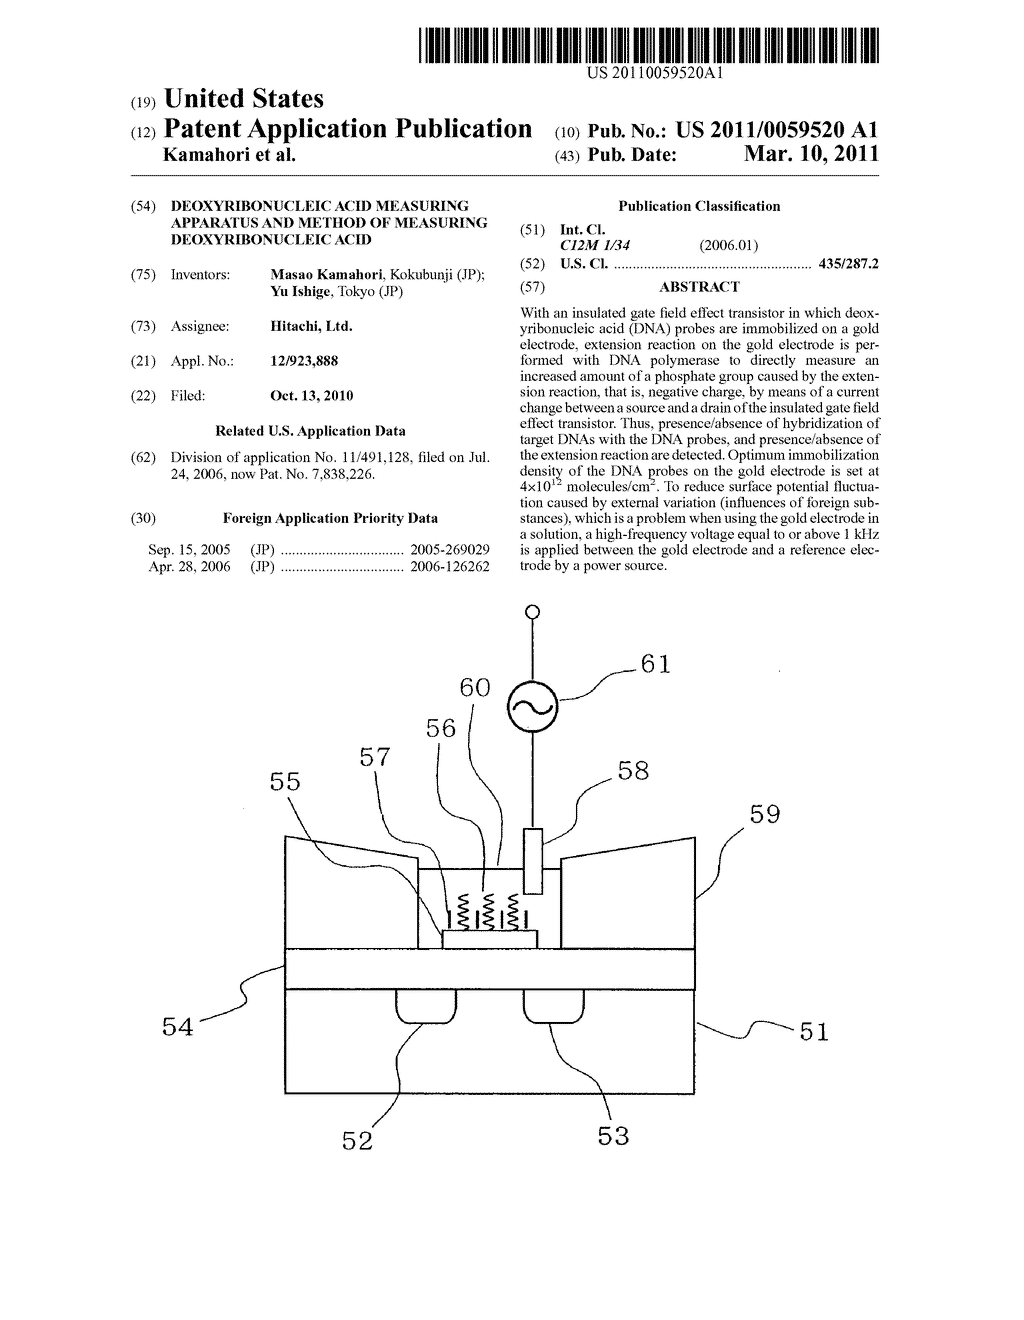 Deoxyribonucleic acid measuring apparatus and method of measuring deoxyribonucleic acid - diagram, schematic, and image 01